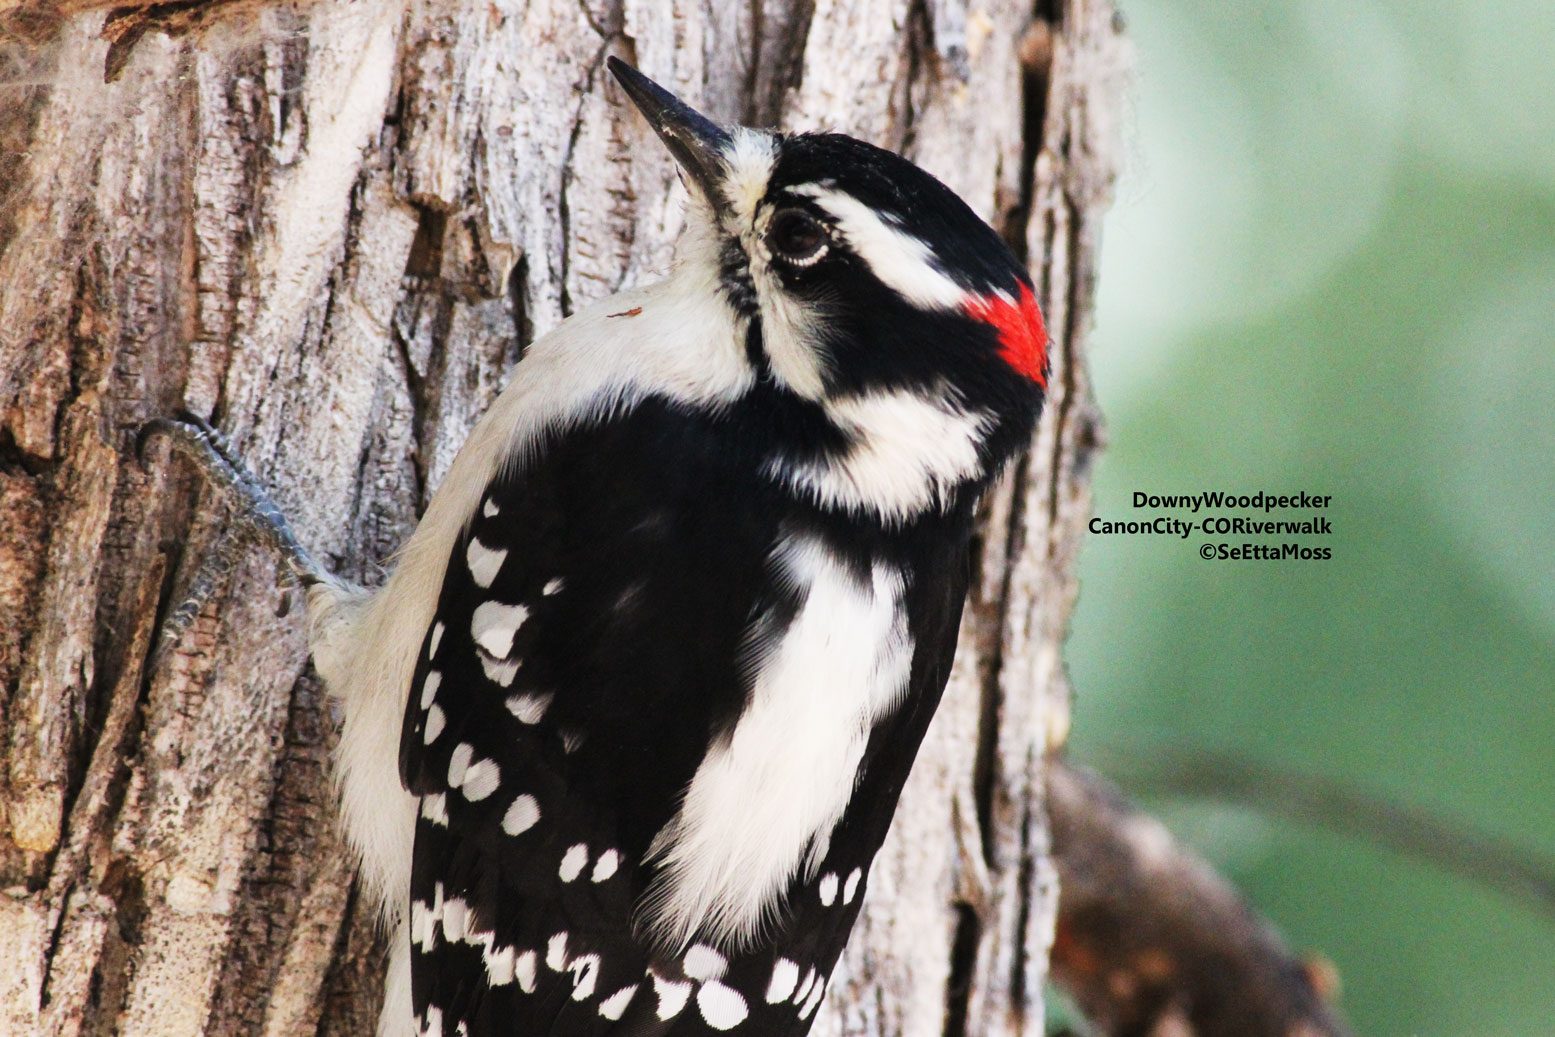 Downy Woodpecker, a yard bird in many areas - Birds and Blooms